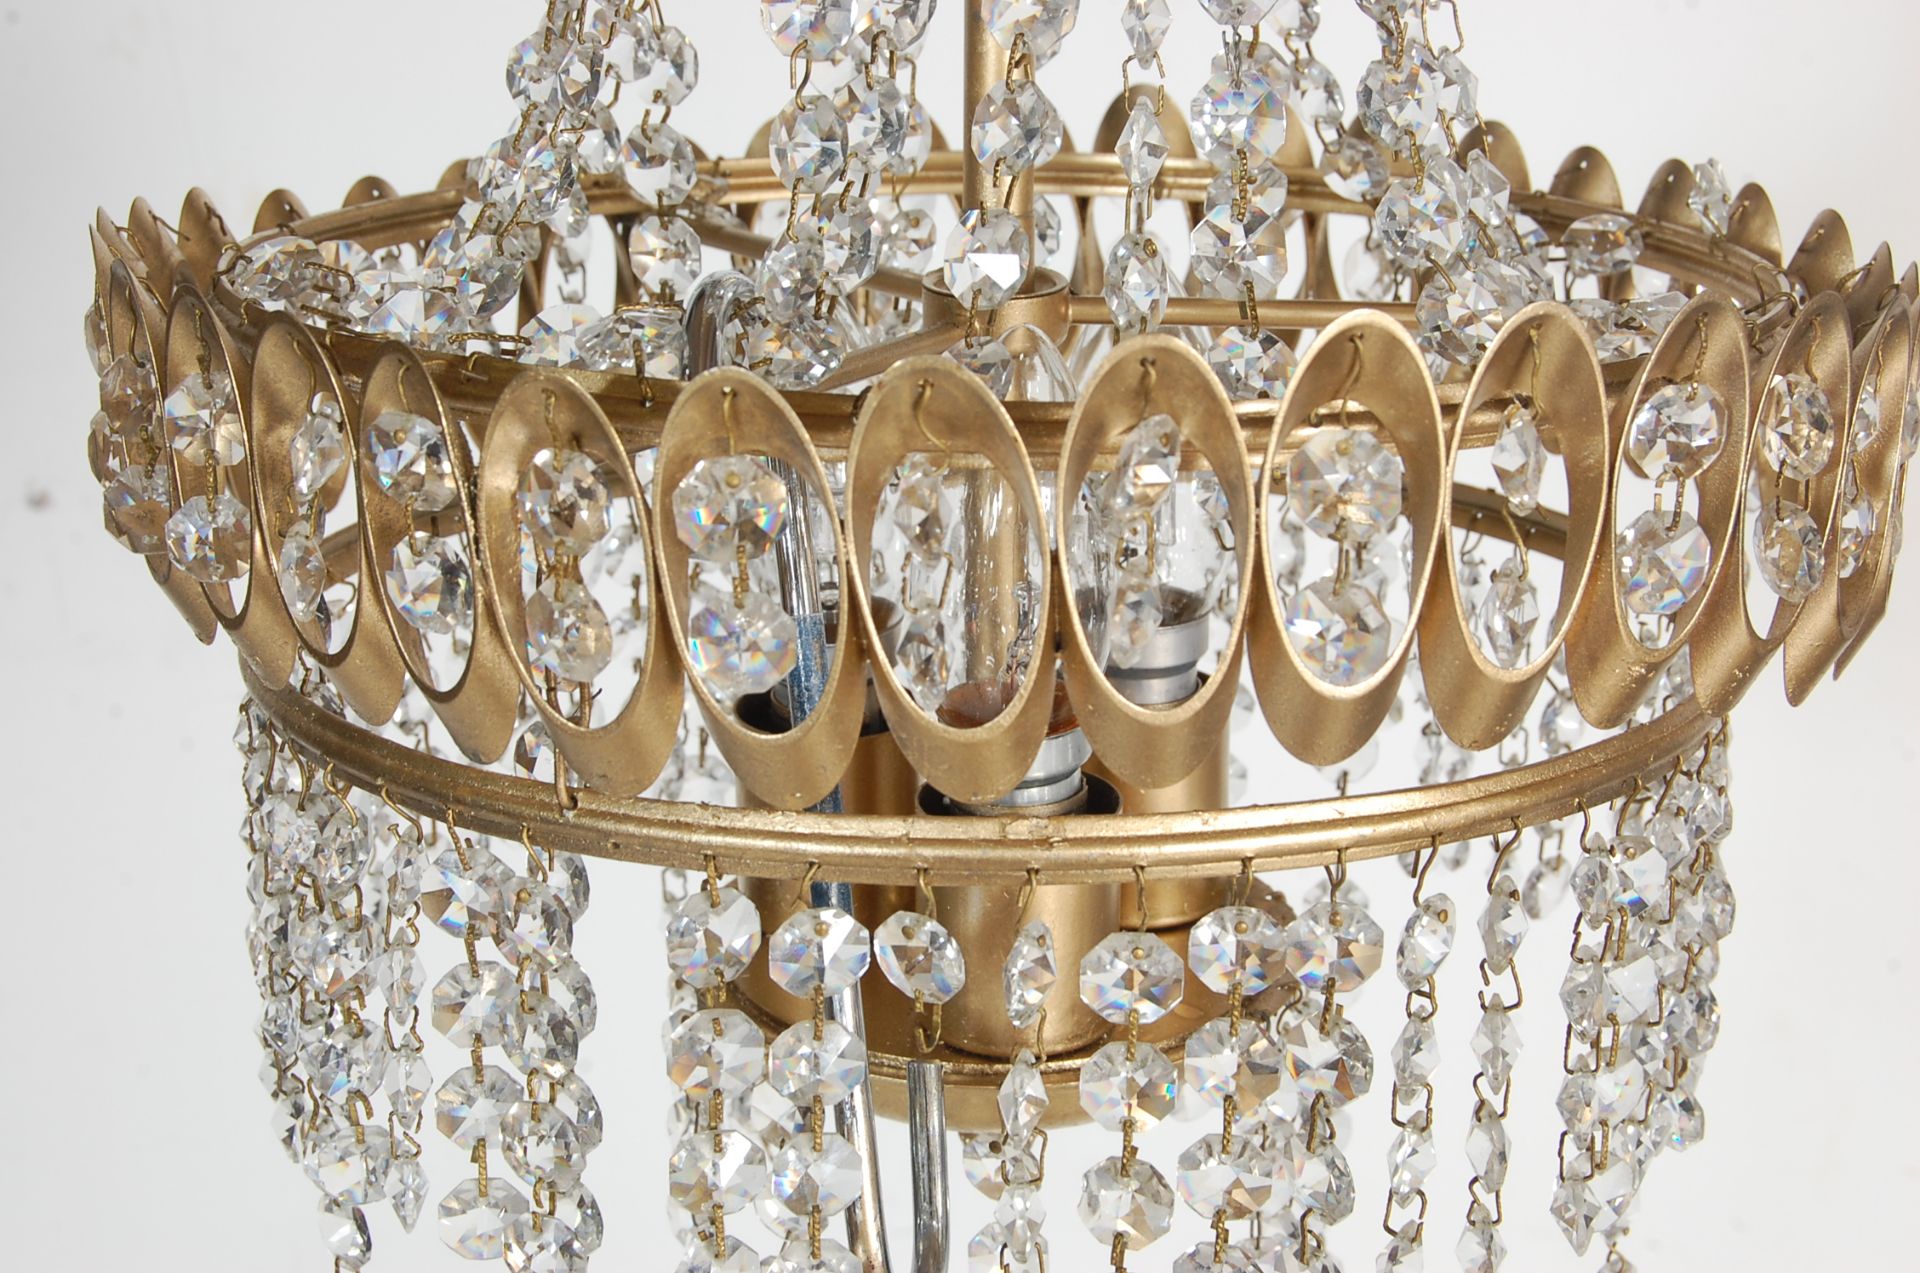 ANTIQUE VICTORIAN STYLE BRASS AND GLASS CHANDELIER - Image 2 of 4